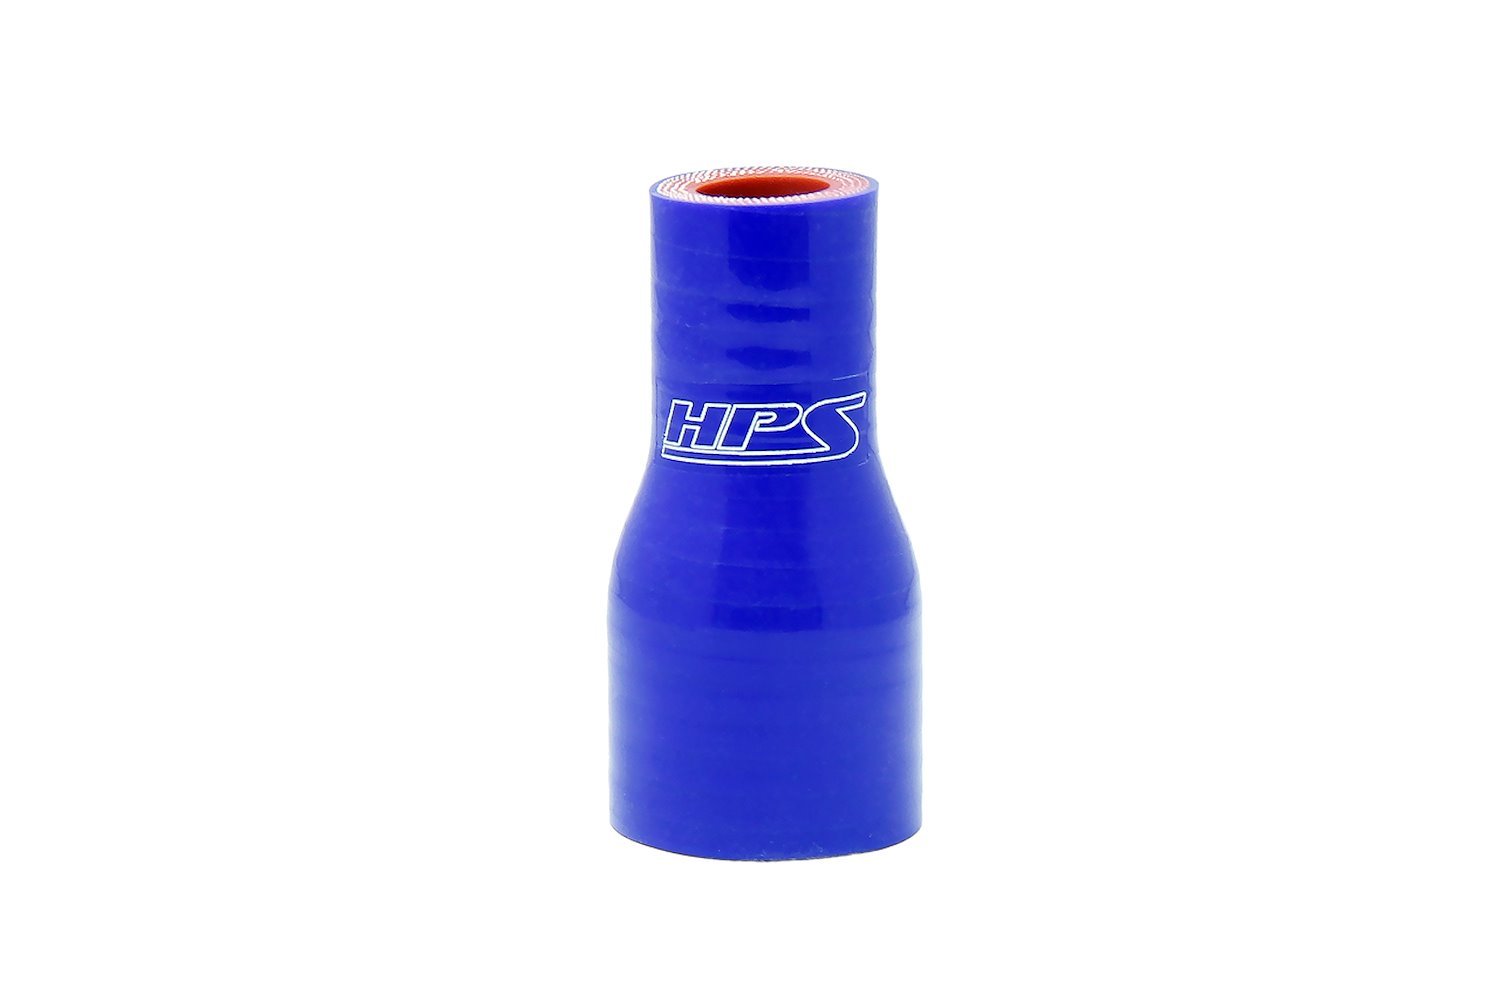 HTSR-100-150-L4-BLUE Silicone Reducer Hose, High-Temp 4-Ply Reinforced, 1 in. - 1-1/2 in. ID, 4 in. Long, Blue